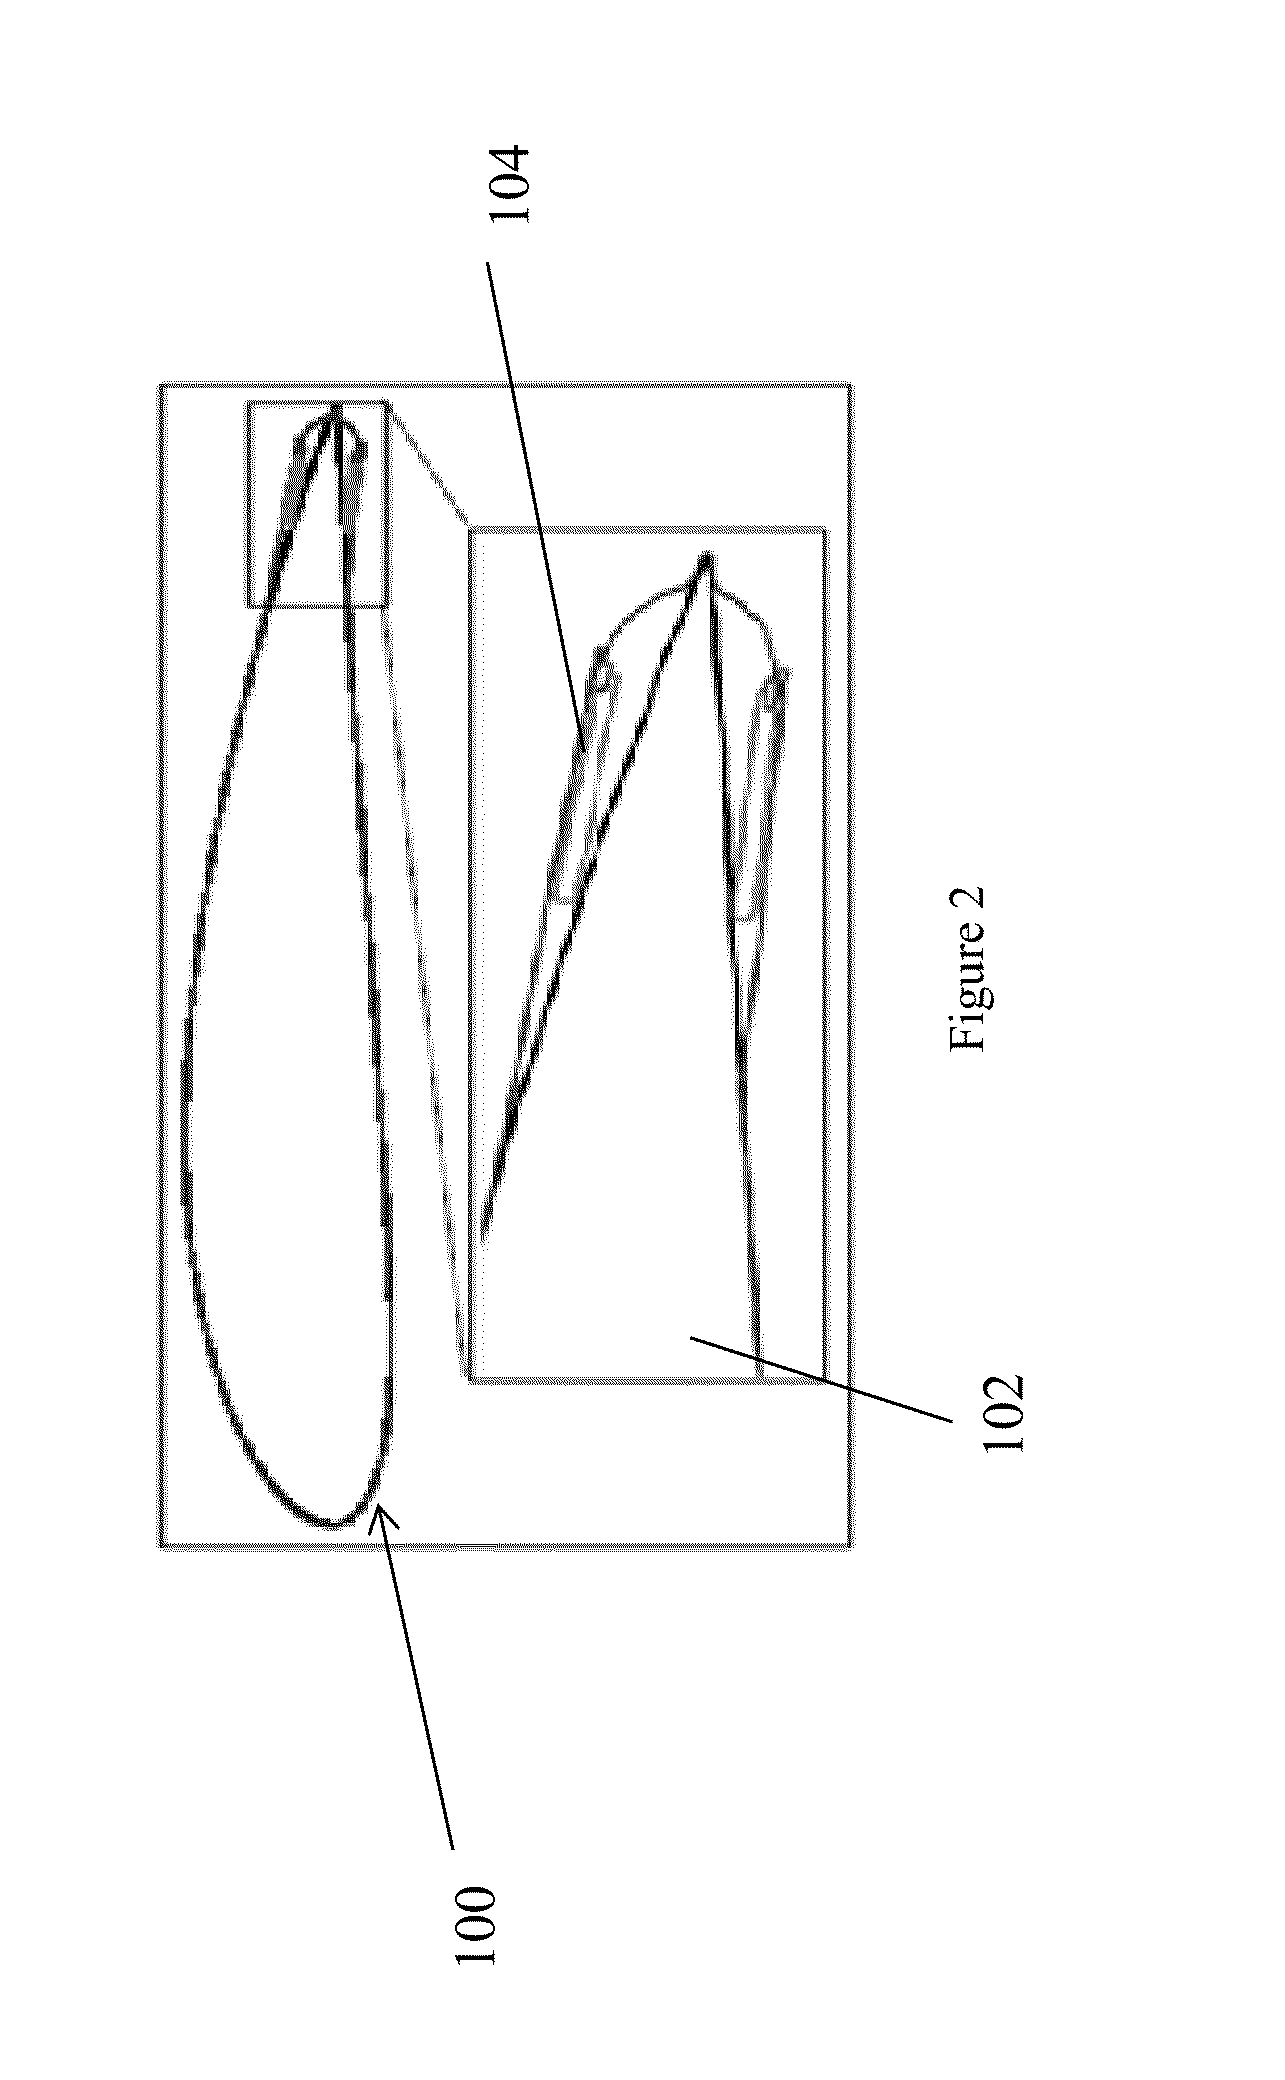 System and method for robust nonlinear regulation control of unmanned aerial vehicles syntetic jet actuators